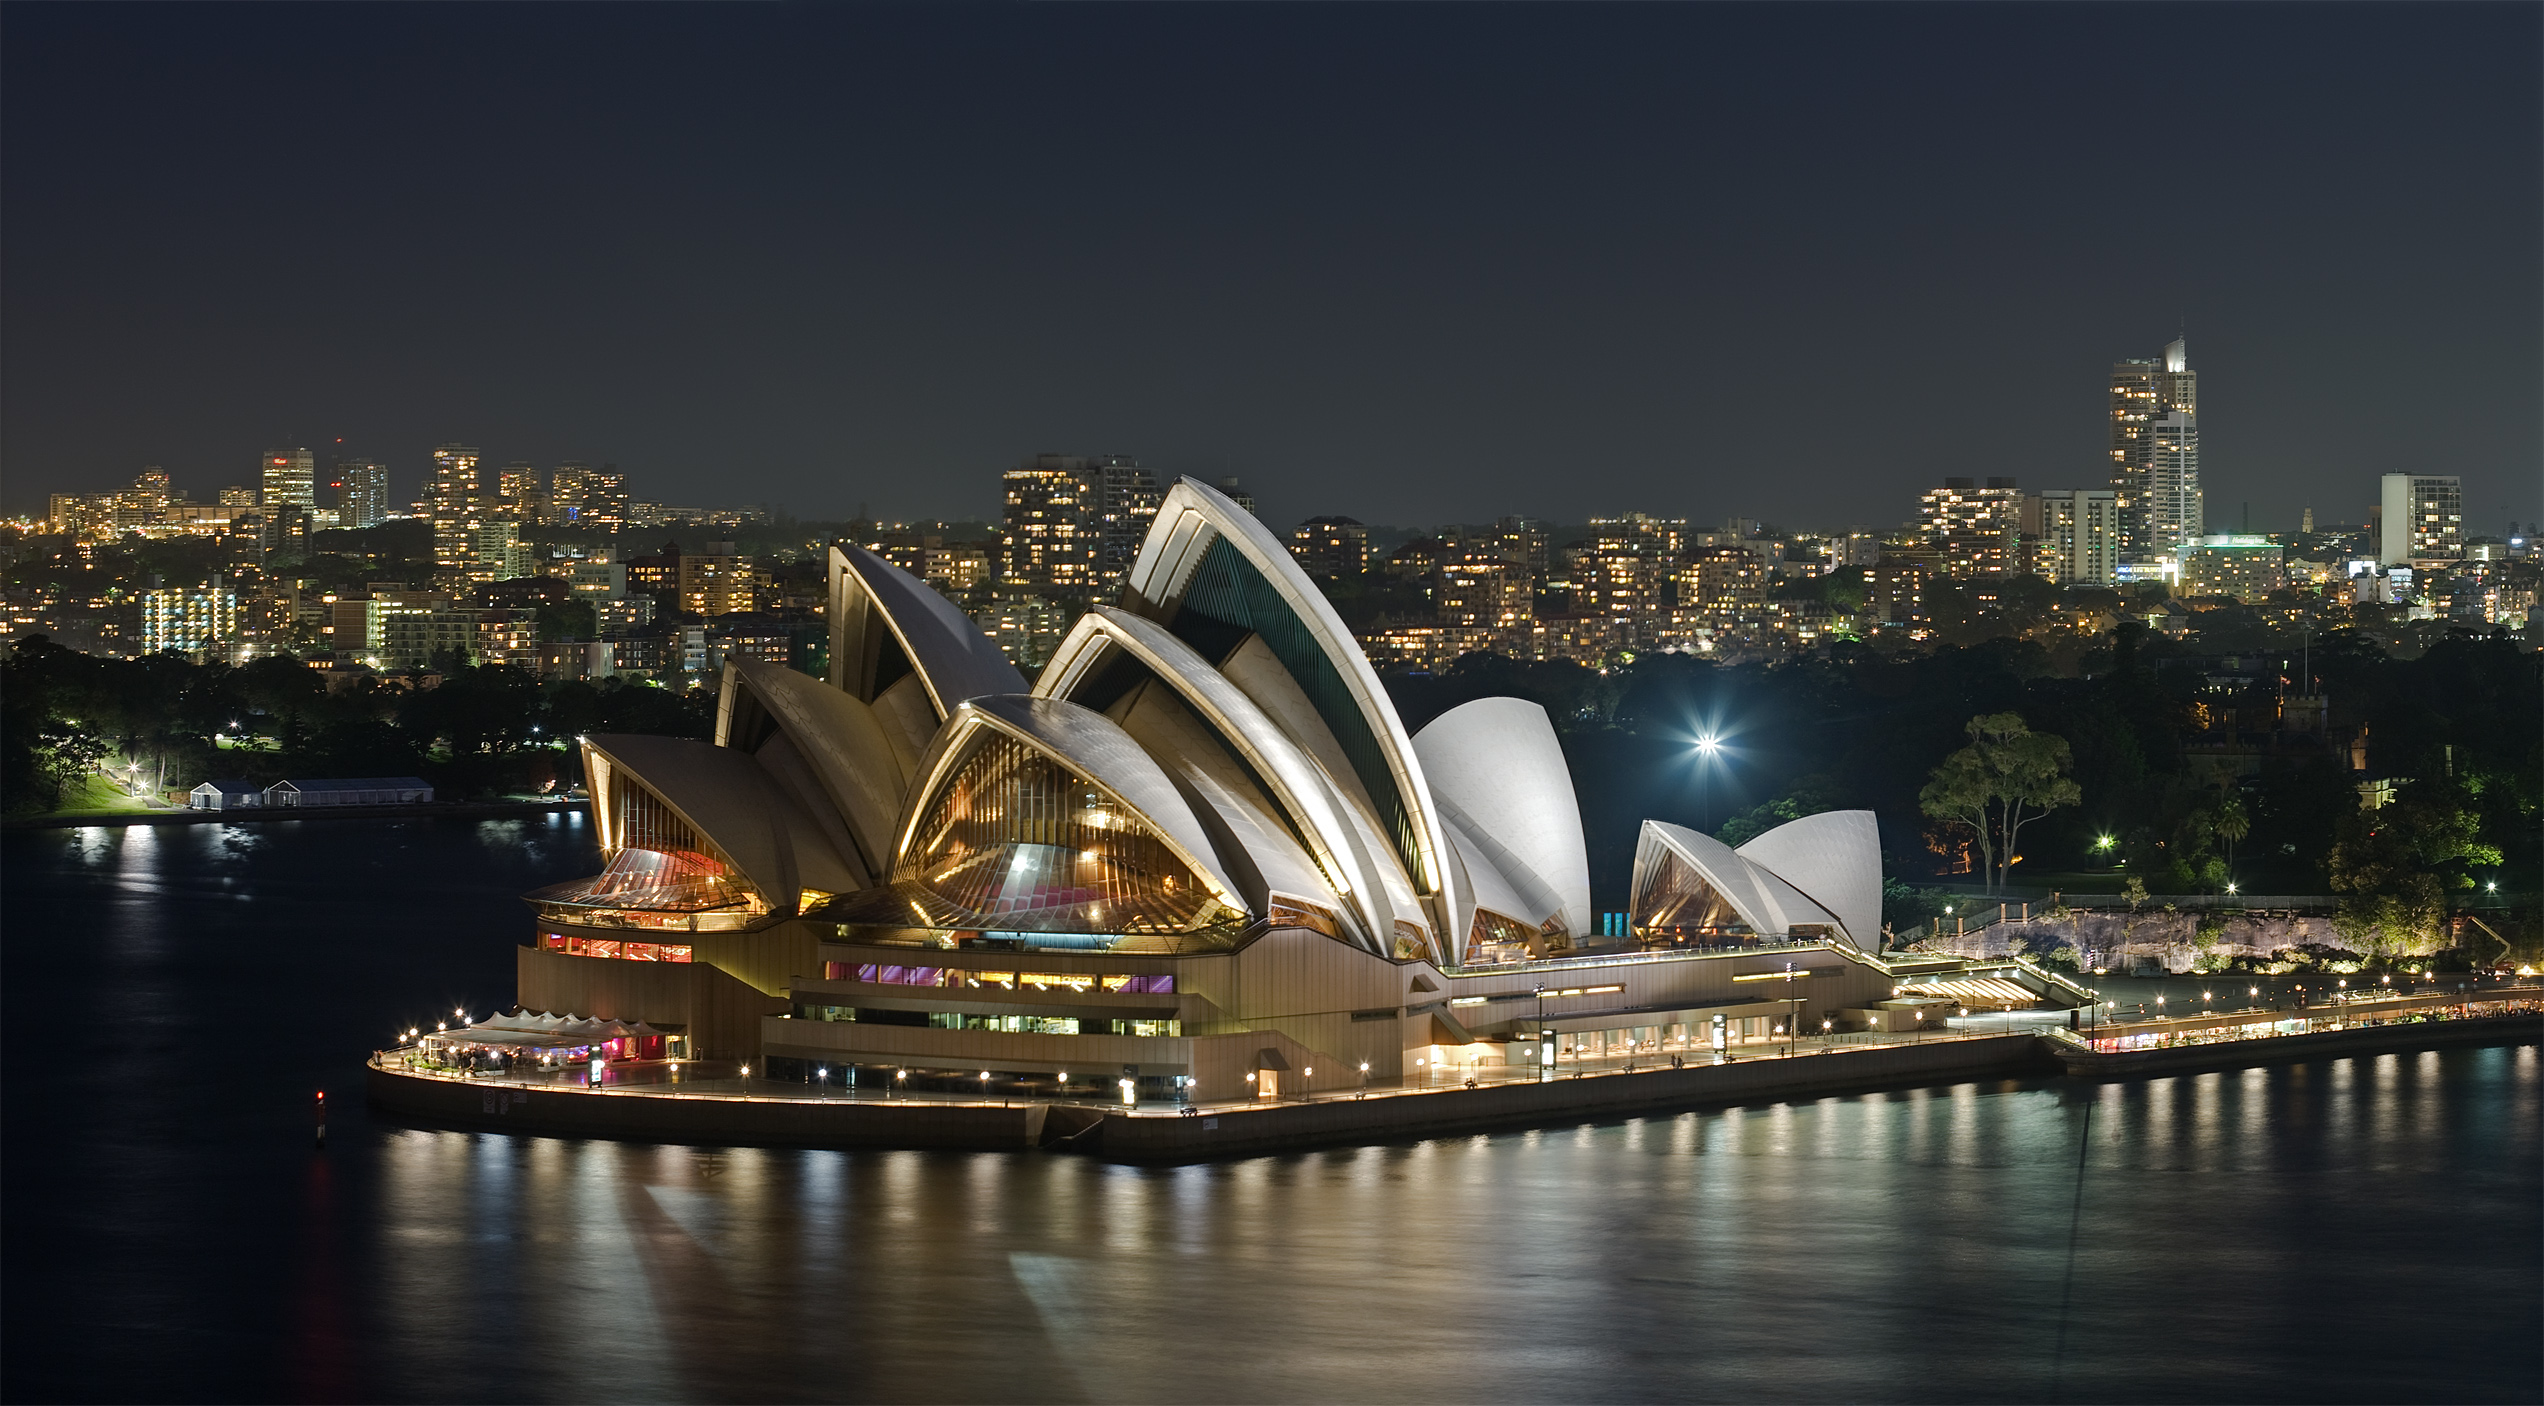 The Sydney Opera House as viewed from Sydney Harbour Bridge at night.